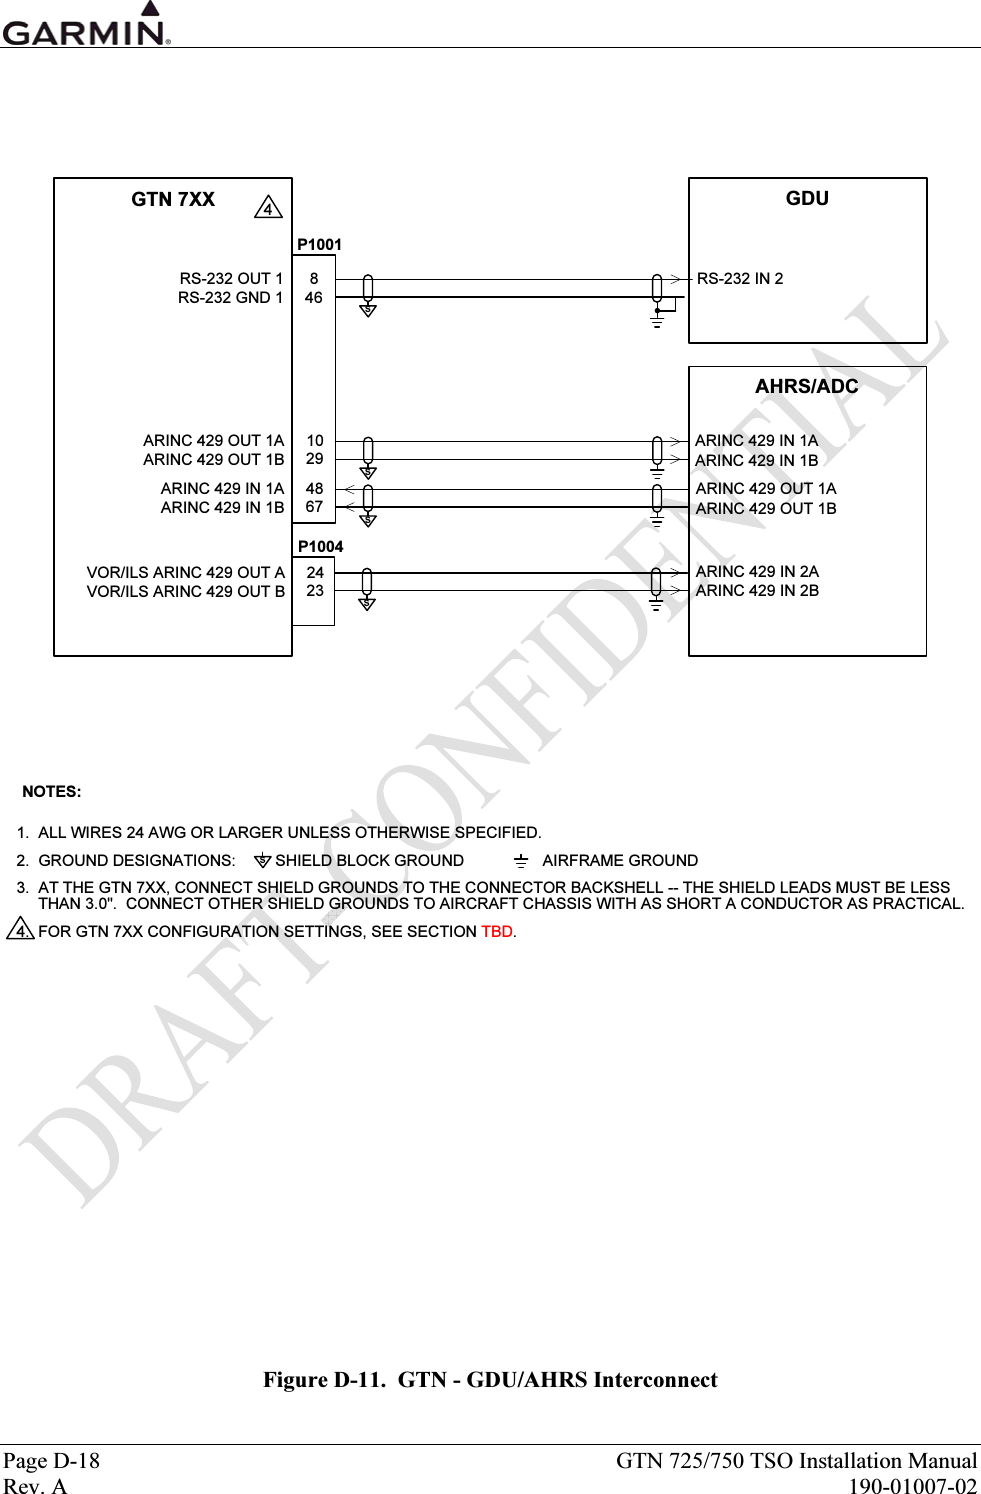  Page D-18  GTN 725/750 TSO Installation Manual Rev. A  190-01007-02 GTN 7XXRS-232 OUT 1RS-232 GND 18464P1001sNOTES:1.  ALL WIRES 24 AWG OR LARGER UNLESS OTHERWISE SPECIFIED.2.  GROUND DESIGNATIONS:         SHIELD BLOCK GROUND                  AIRFRAME GROUND3.  AT THE GTN 7XX, CONNECT SHIELD GROUNDS TO THE CONNECTOR BACKSHELL -- THE SHIELD LEADS MUST BE LESS THAN 3.0&quot;.  CONNECT OTHER SHIELD GROUNDS TO AIRCRAFT CHASSIS WITH AS SHORT A CONDUCTOR AS PRACTICAL.4. FOR GTN 7XX CONFIGURATION SETTINGS, SEE SECTION TBD.sP1004VOR/ILS ARINC 429 OUT AVOR/ILS ARINC 429 OUT B2423ARINC 429 OUT 1AARINC 429 OUT 1B1029ARINC 429 IN 1AARINC 429 IN 1B4867sssGDURS-232 IN 2ARINC 429 IN 1AARINC 429 IN 1BARINC 429 IN 2AARINC 429 IN 2BARINC 429 OUT 1AARINC 429 OUT 1BAHRS/ADC Figure D-11.  GTN - GDU/AHRS Interconnect 